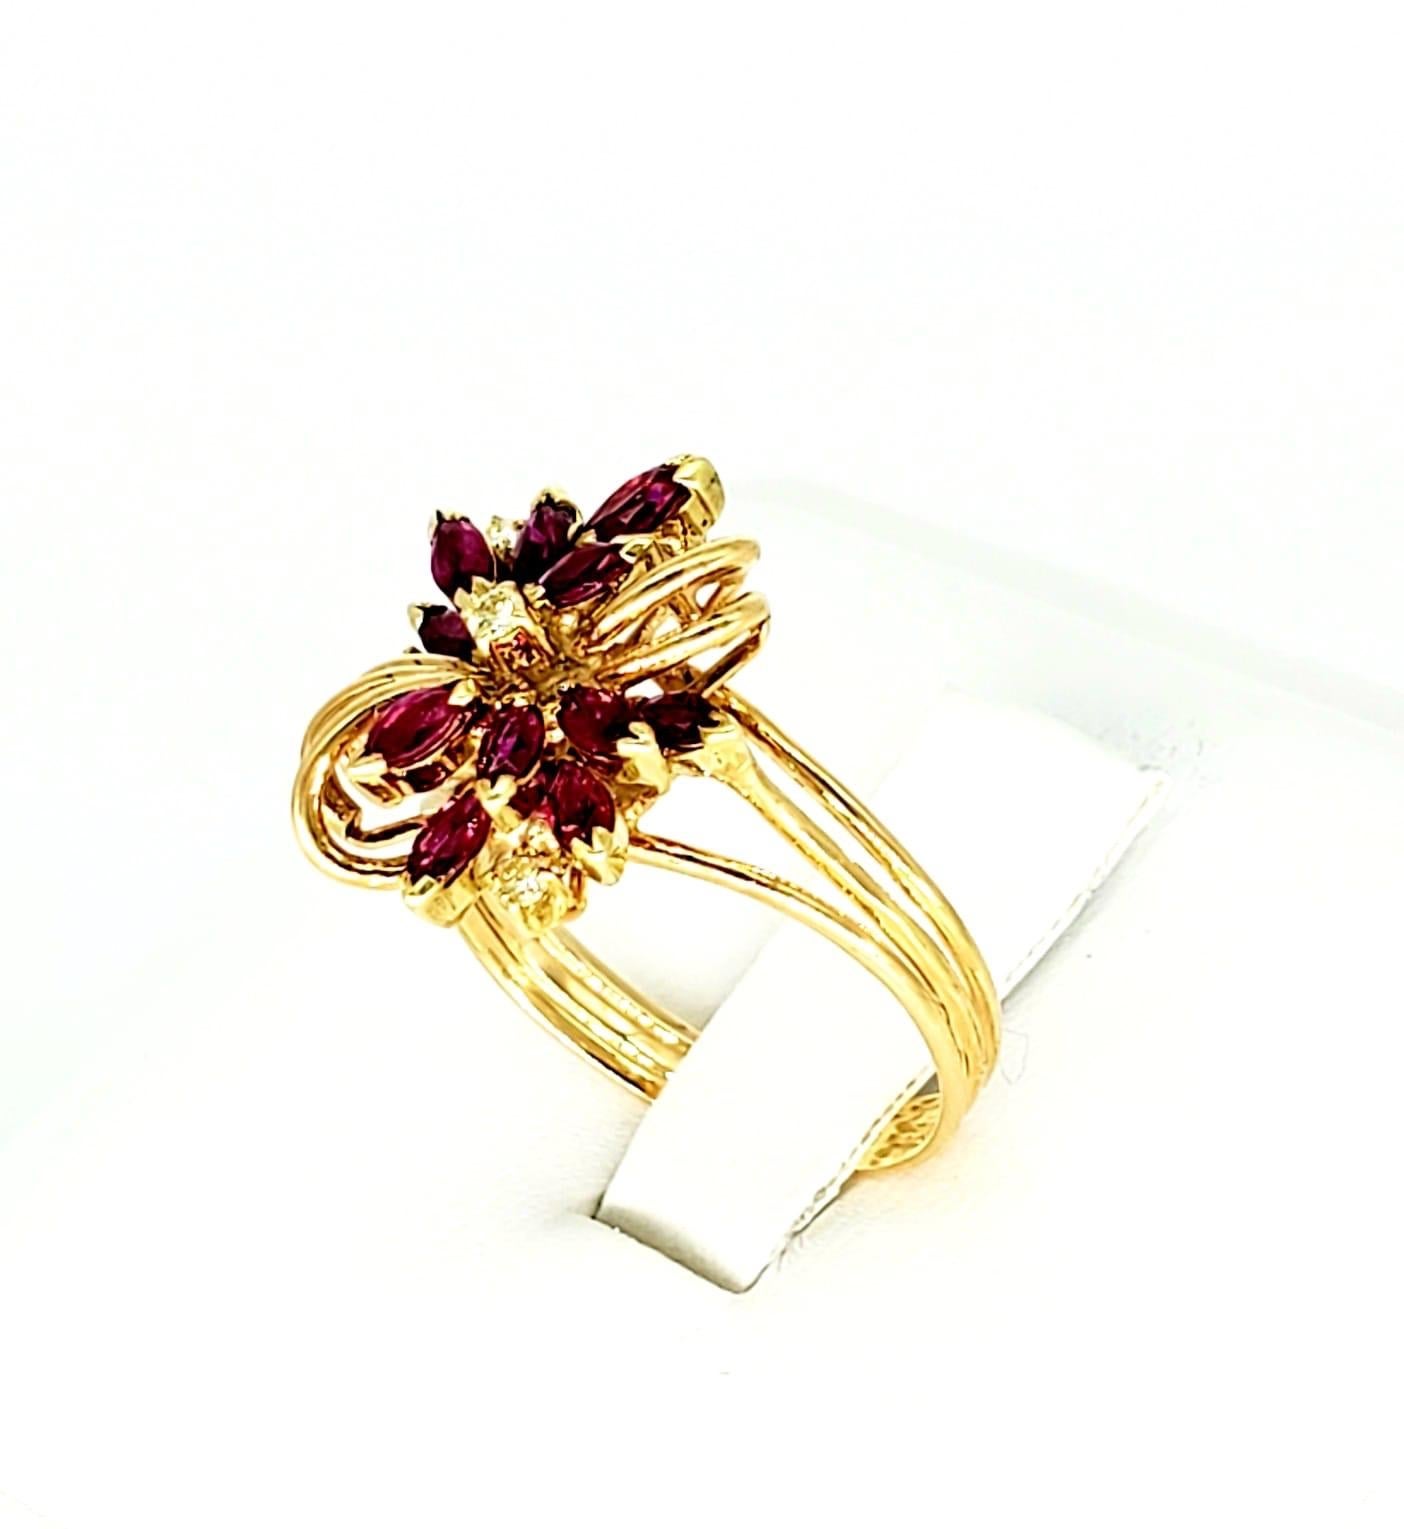 Vintage 1.30 Carat Ruby & Diamonds Flower Cluster Ring. The ring features a flower design very with marquise shaped Ruby’s weighing approx 1.10 carat and round diamonds weighting approx 0.10 carat. The ring is a size 6.5 and is made of 14k solid